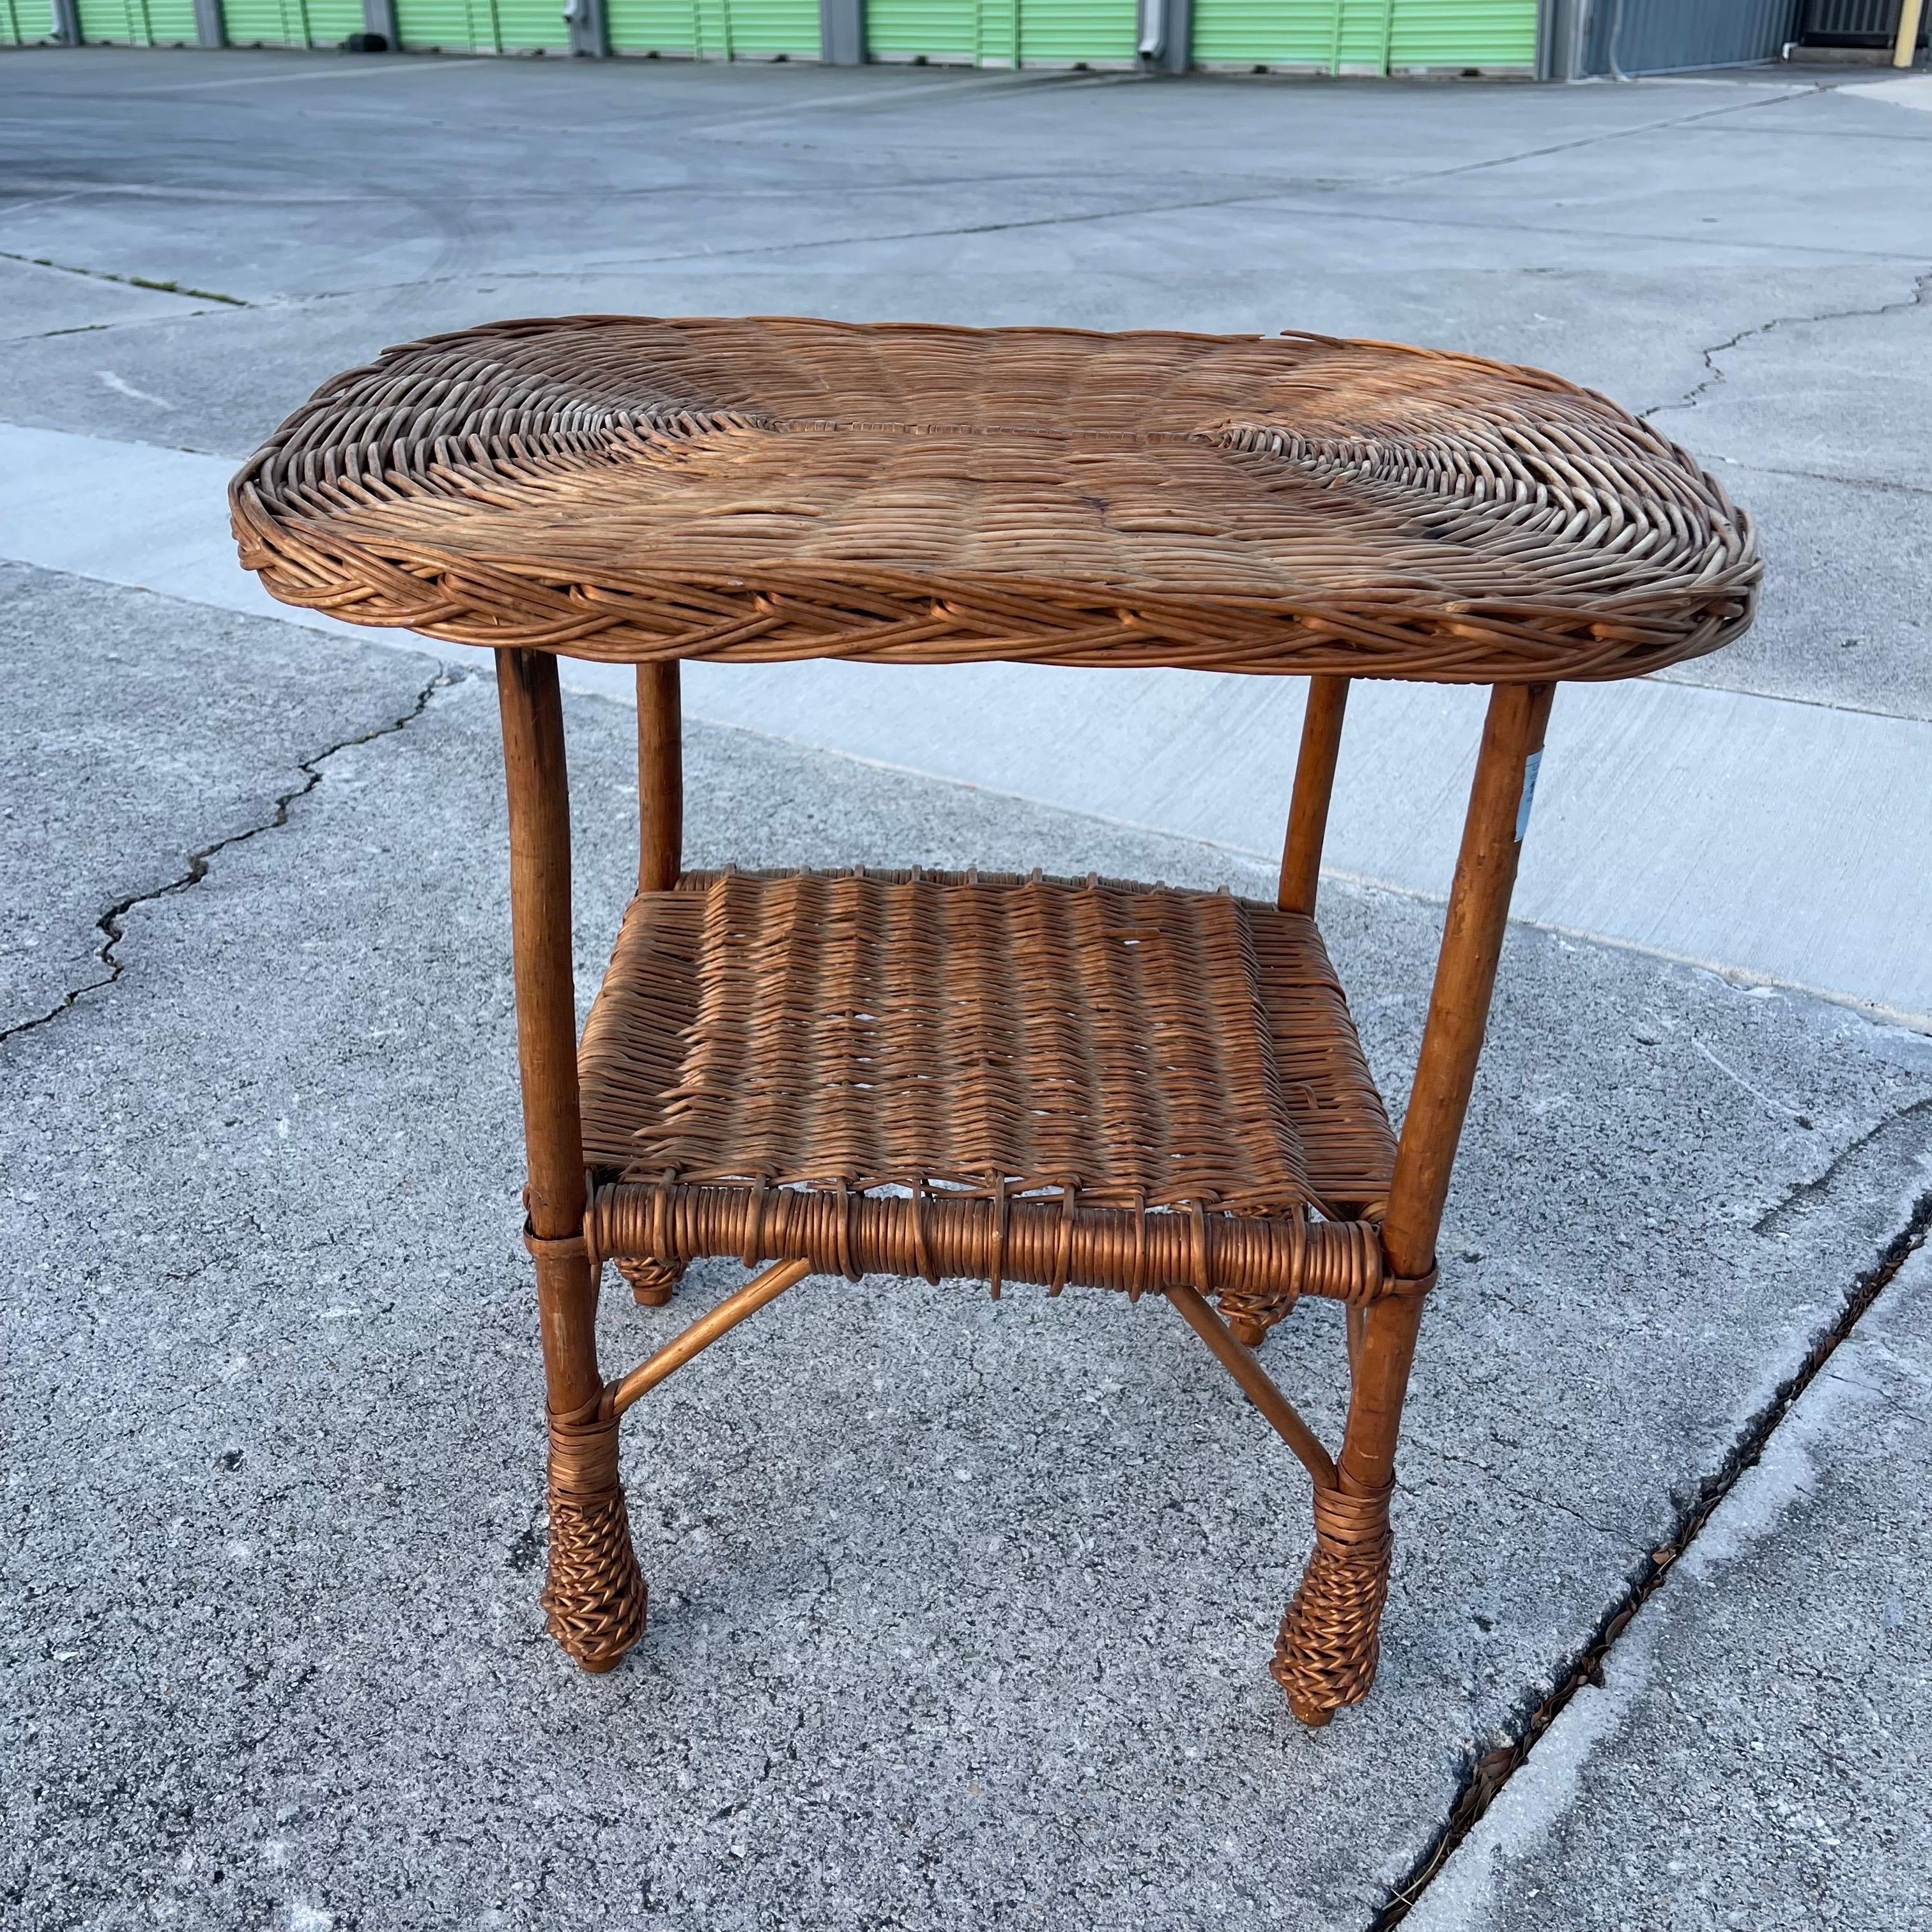 Charming side table handmade of woven wicker.